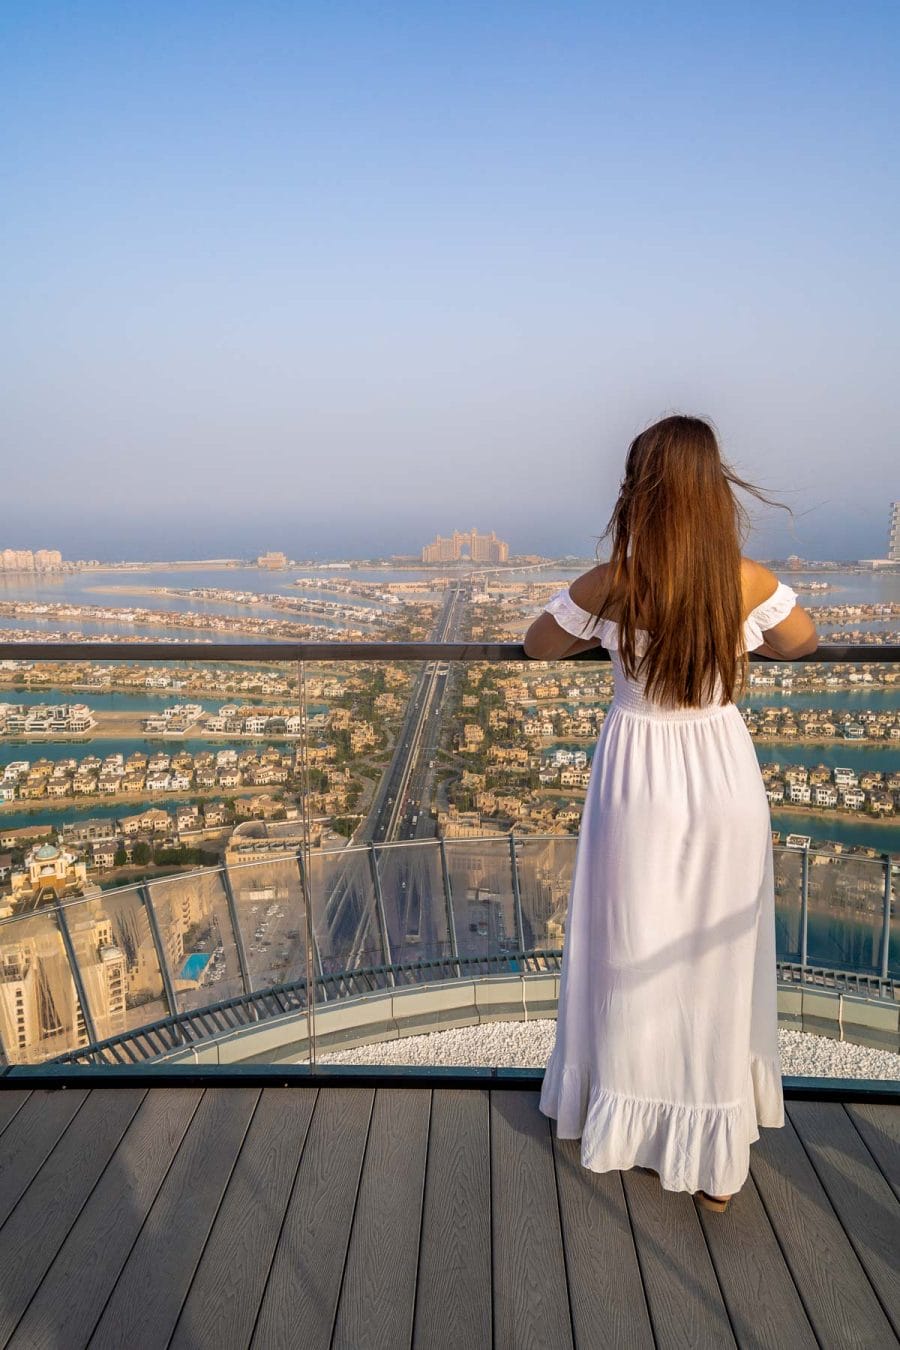 Girl in white dress at The View at The Palm overlooking Palm Jumeirah